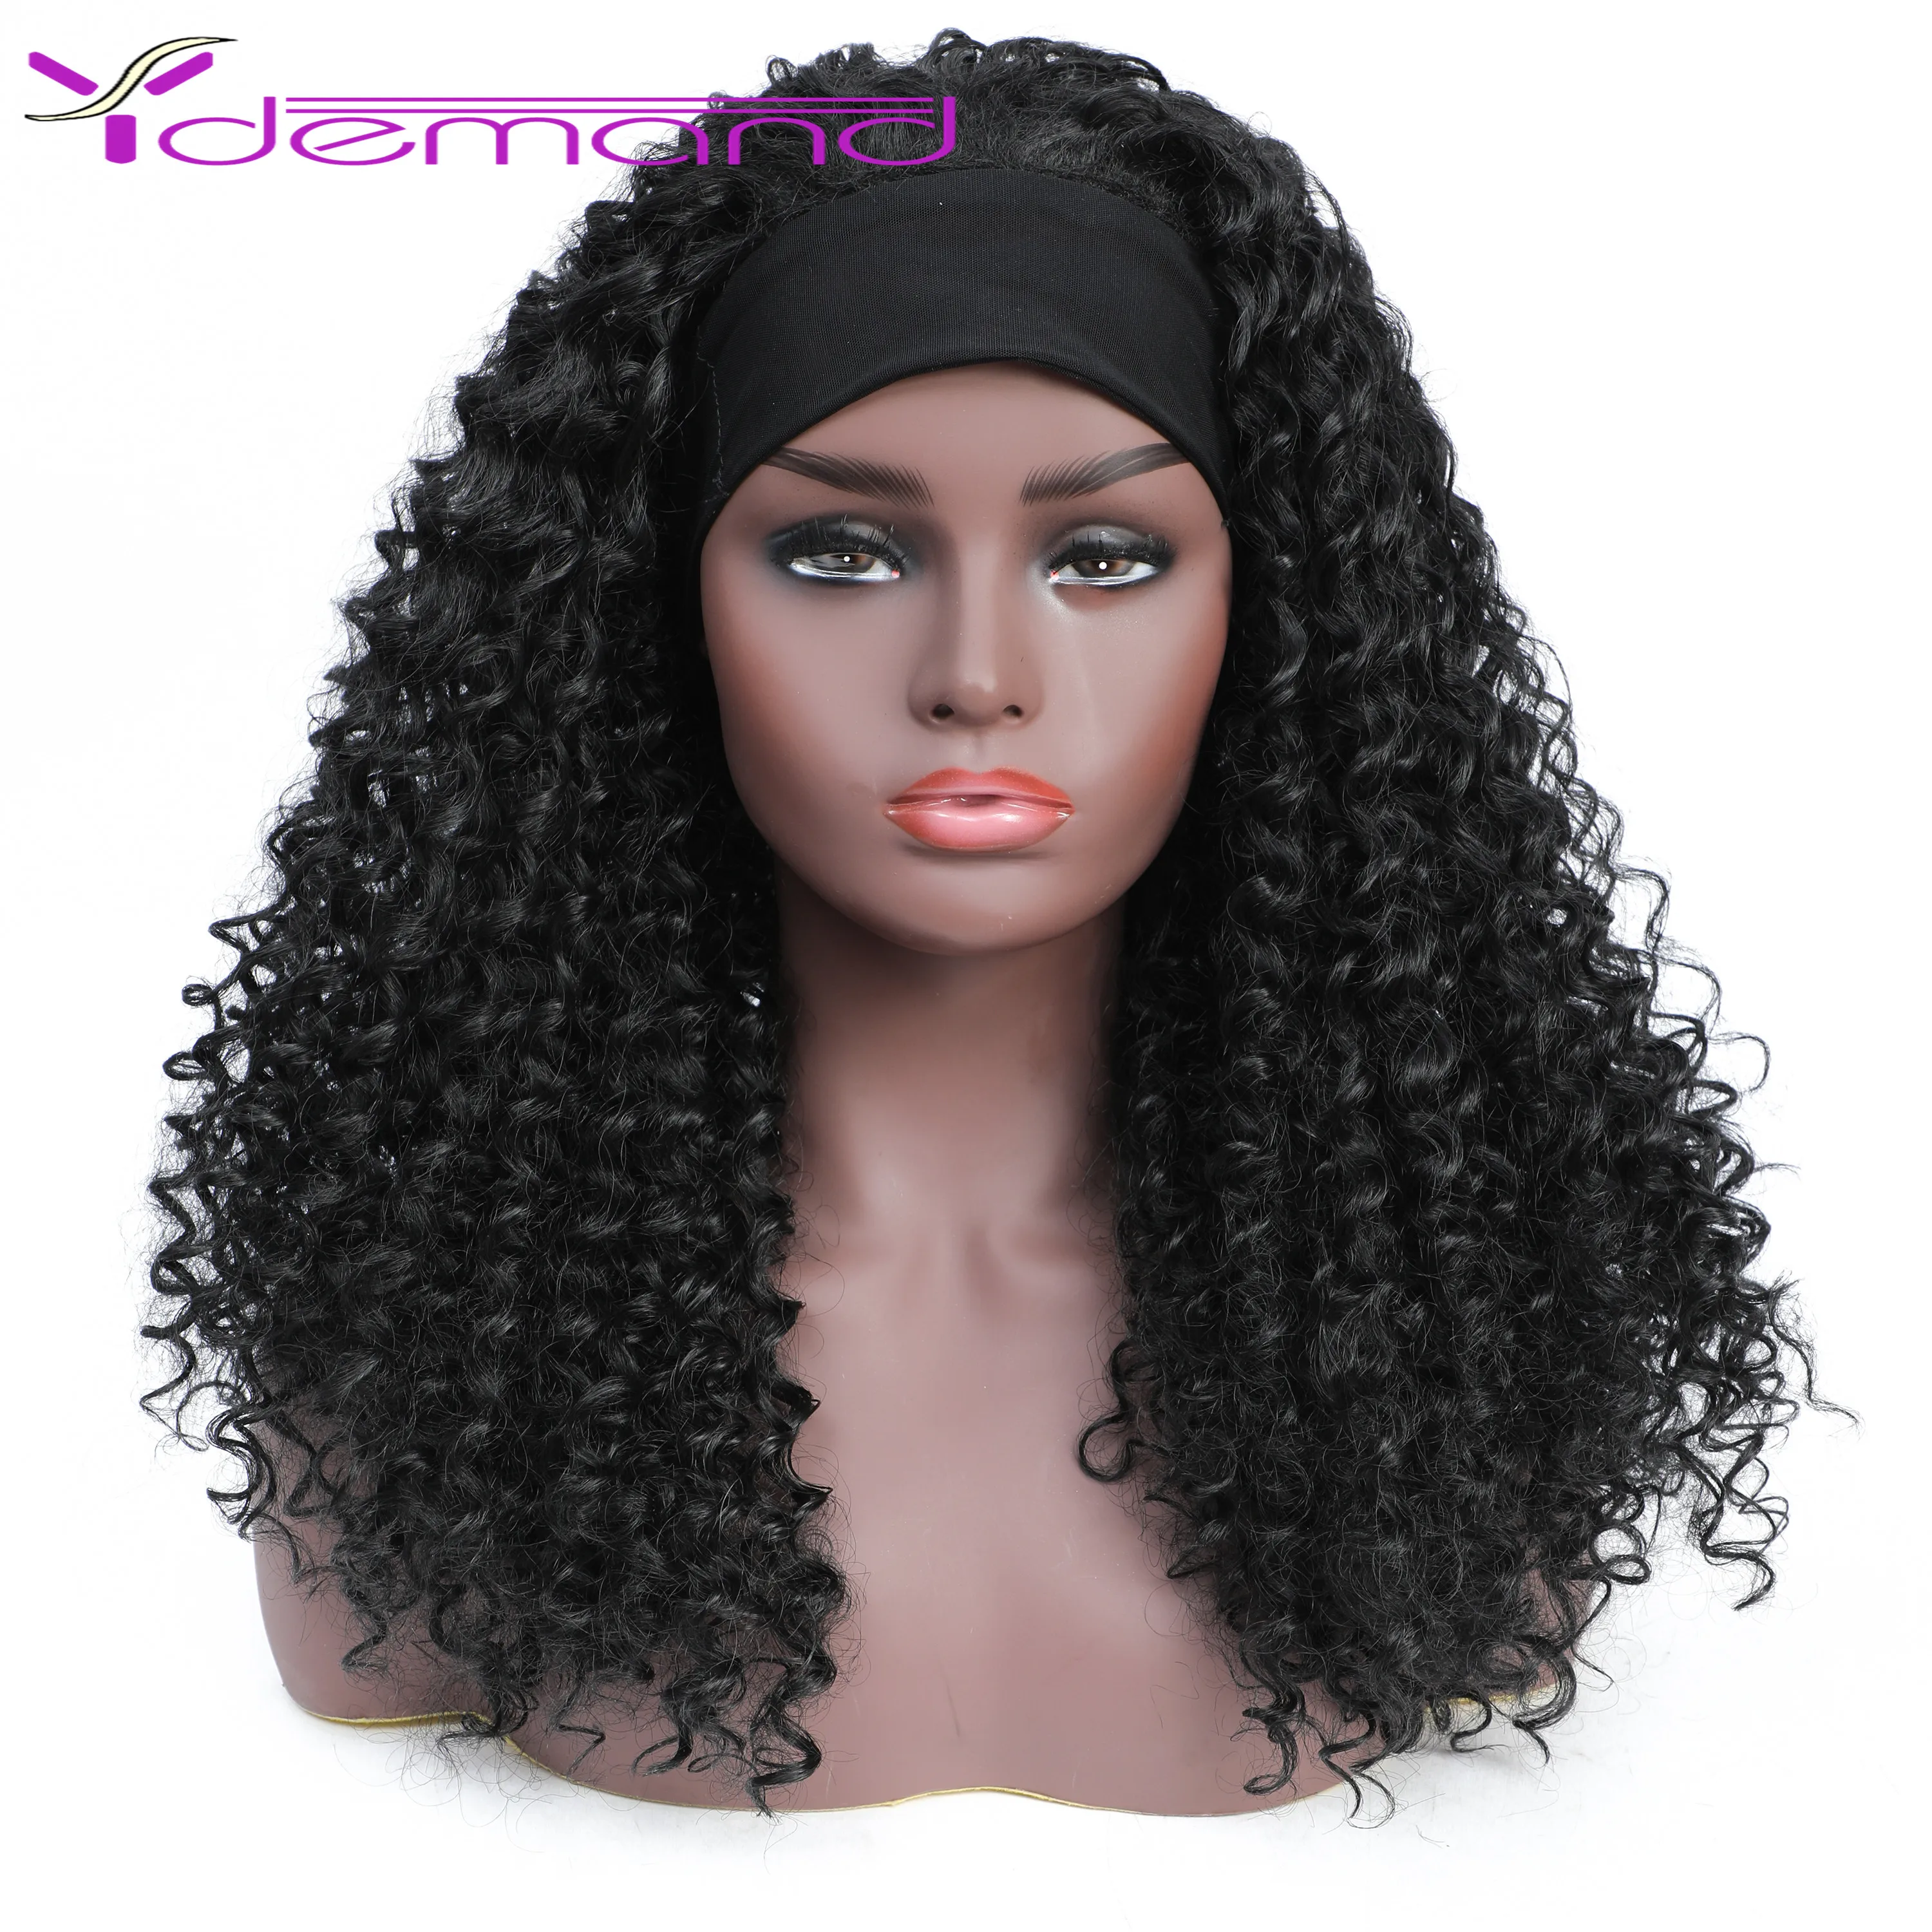 Y Demand Kinky Curly Wig 18inch Long Synthetic Hair Wig For Negro Women Kinky Curly Headband Wig Affordable Natural Hair Wig